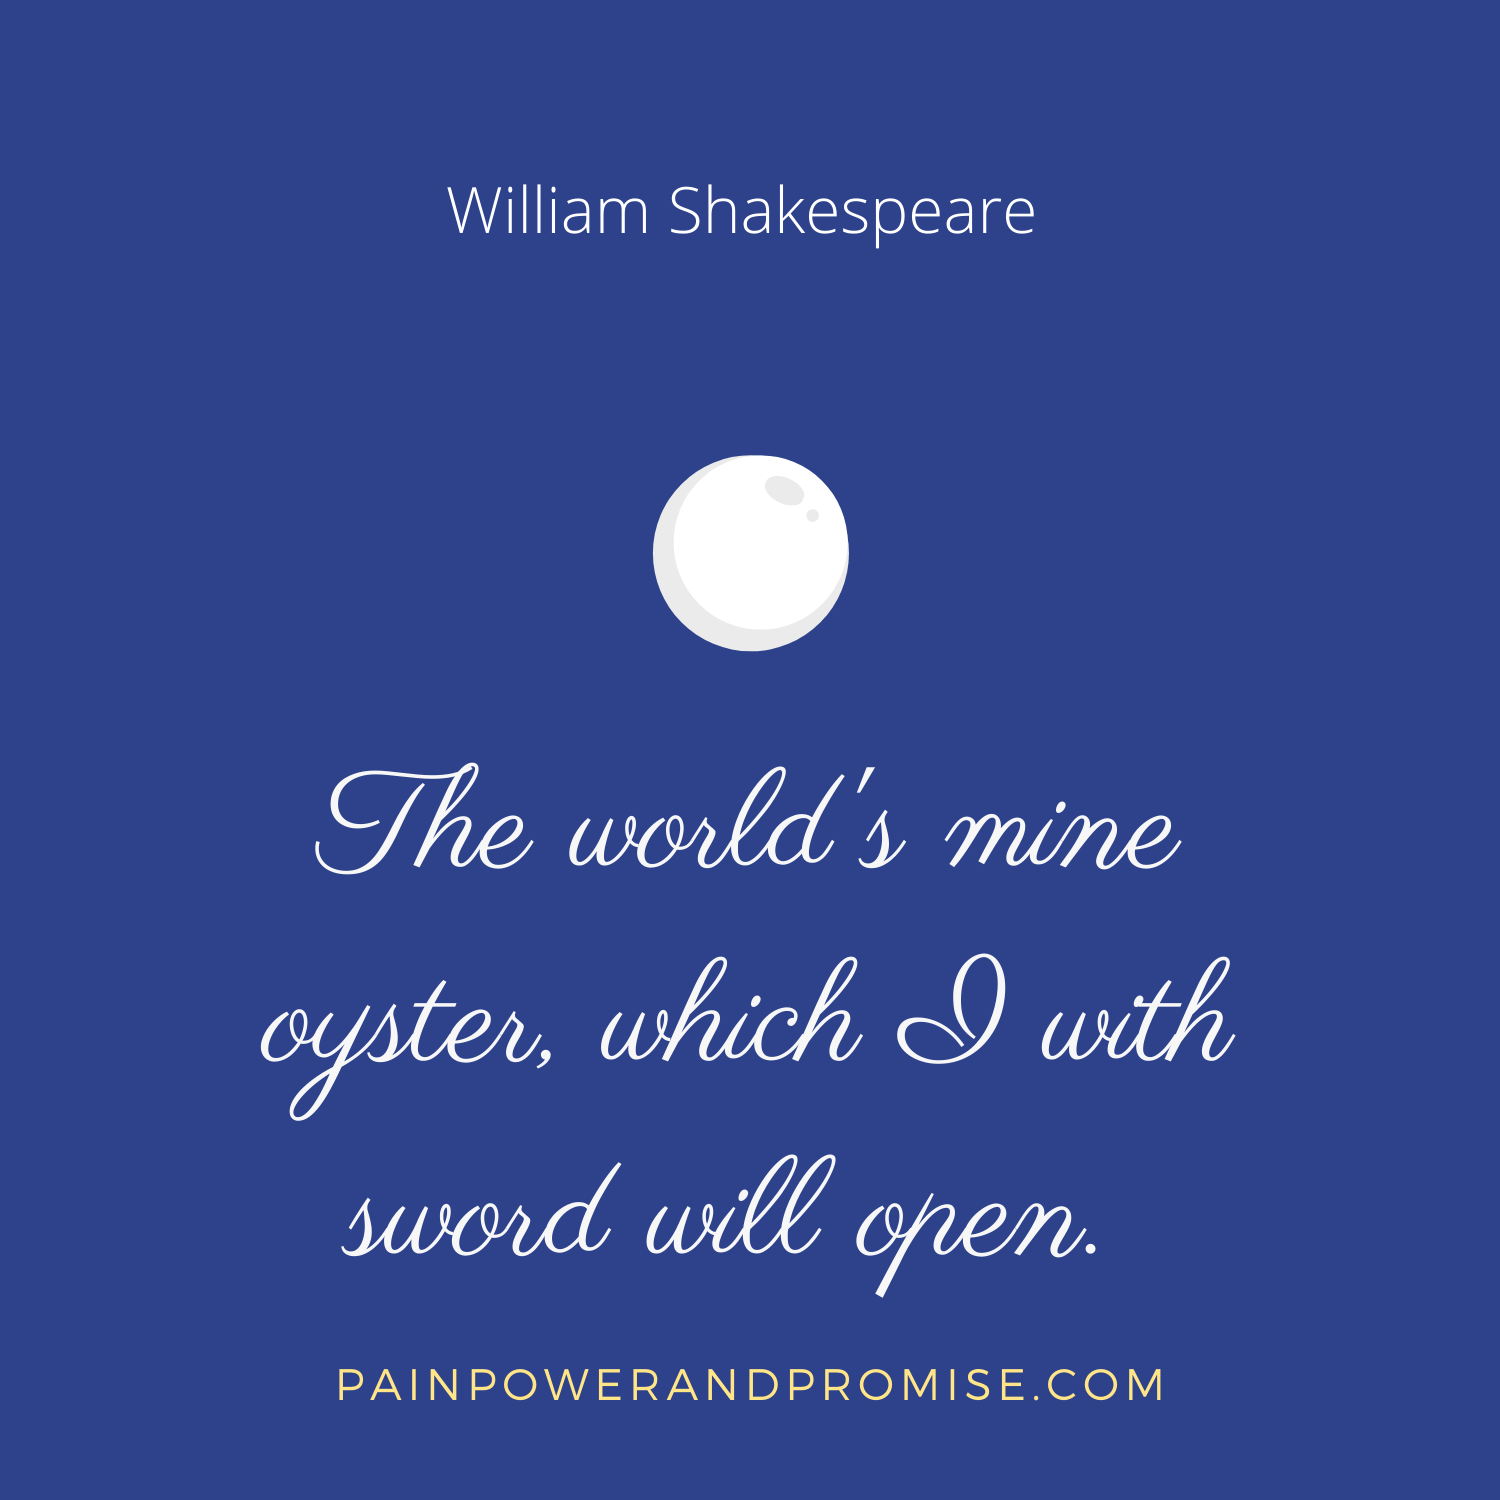 The world's mine oyster, which I with sword will open.